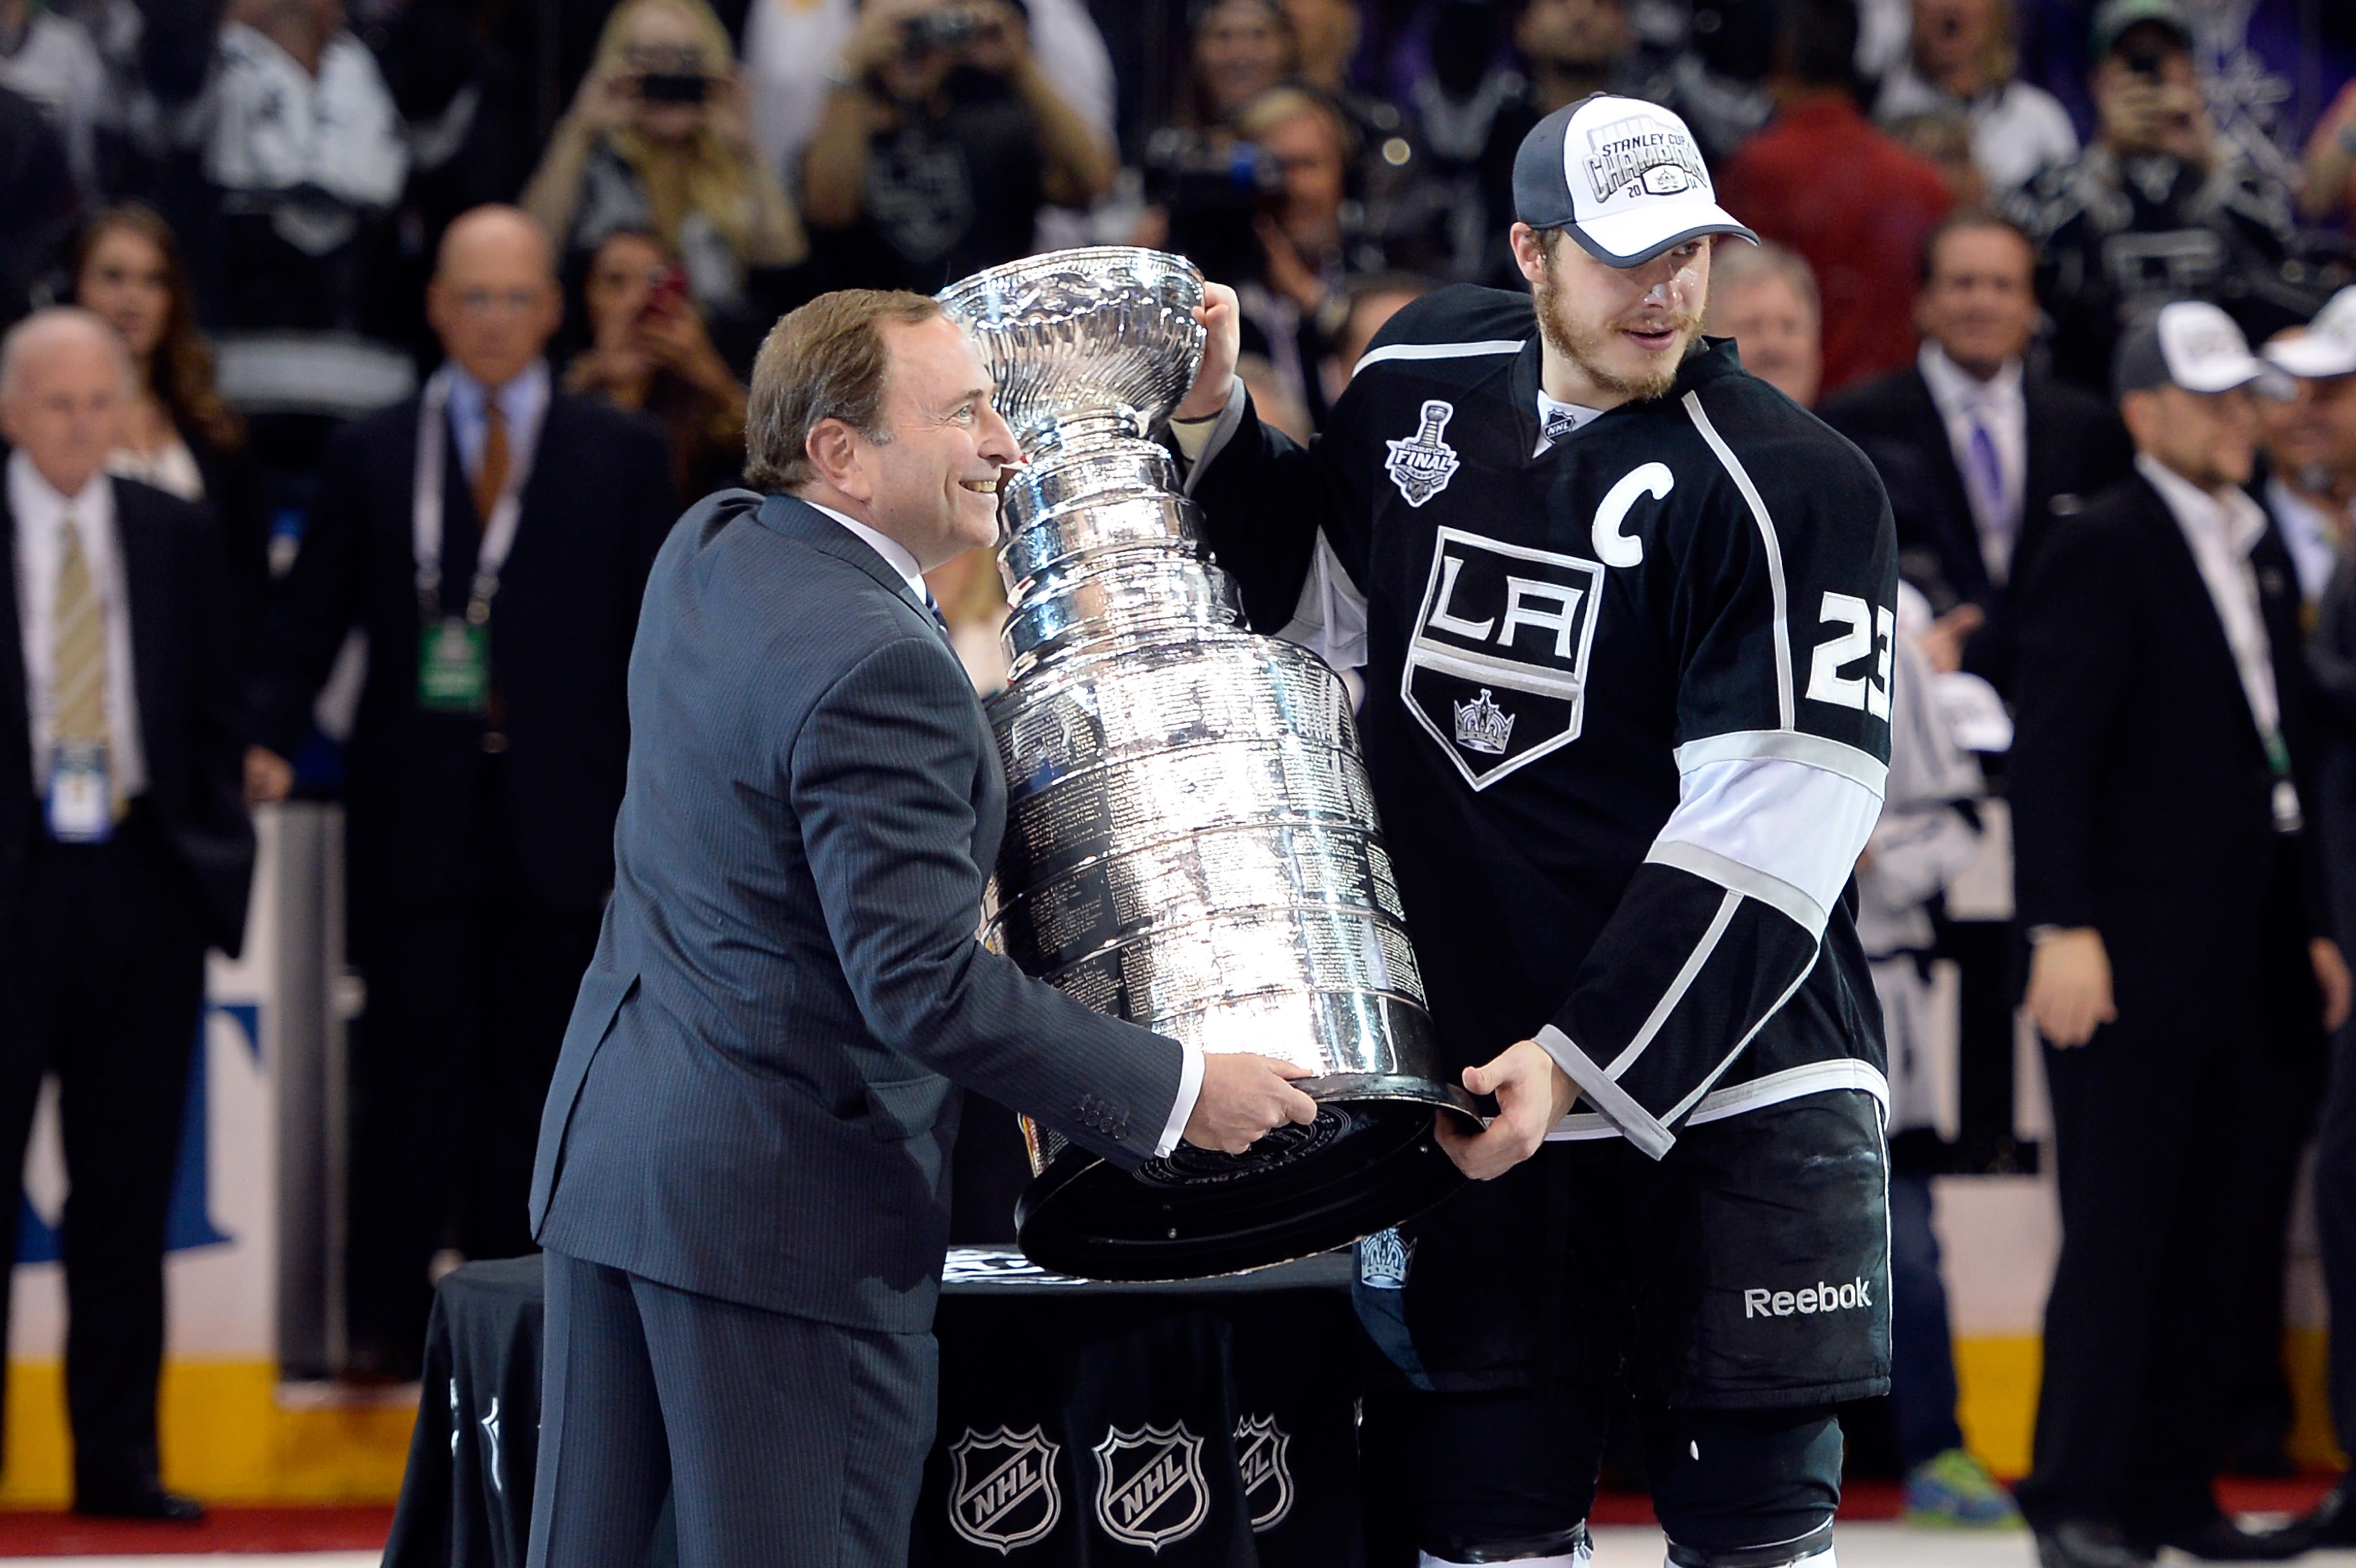 Los Angeles Kings win hockey's Stanley Cup in double-overtime thriller | CNN